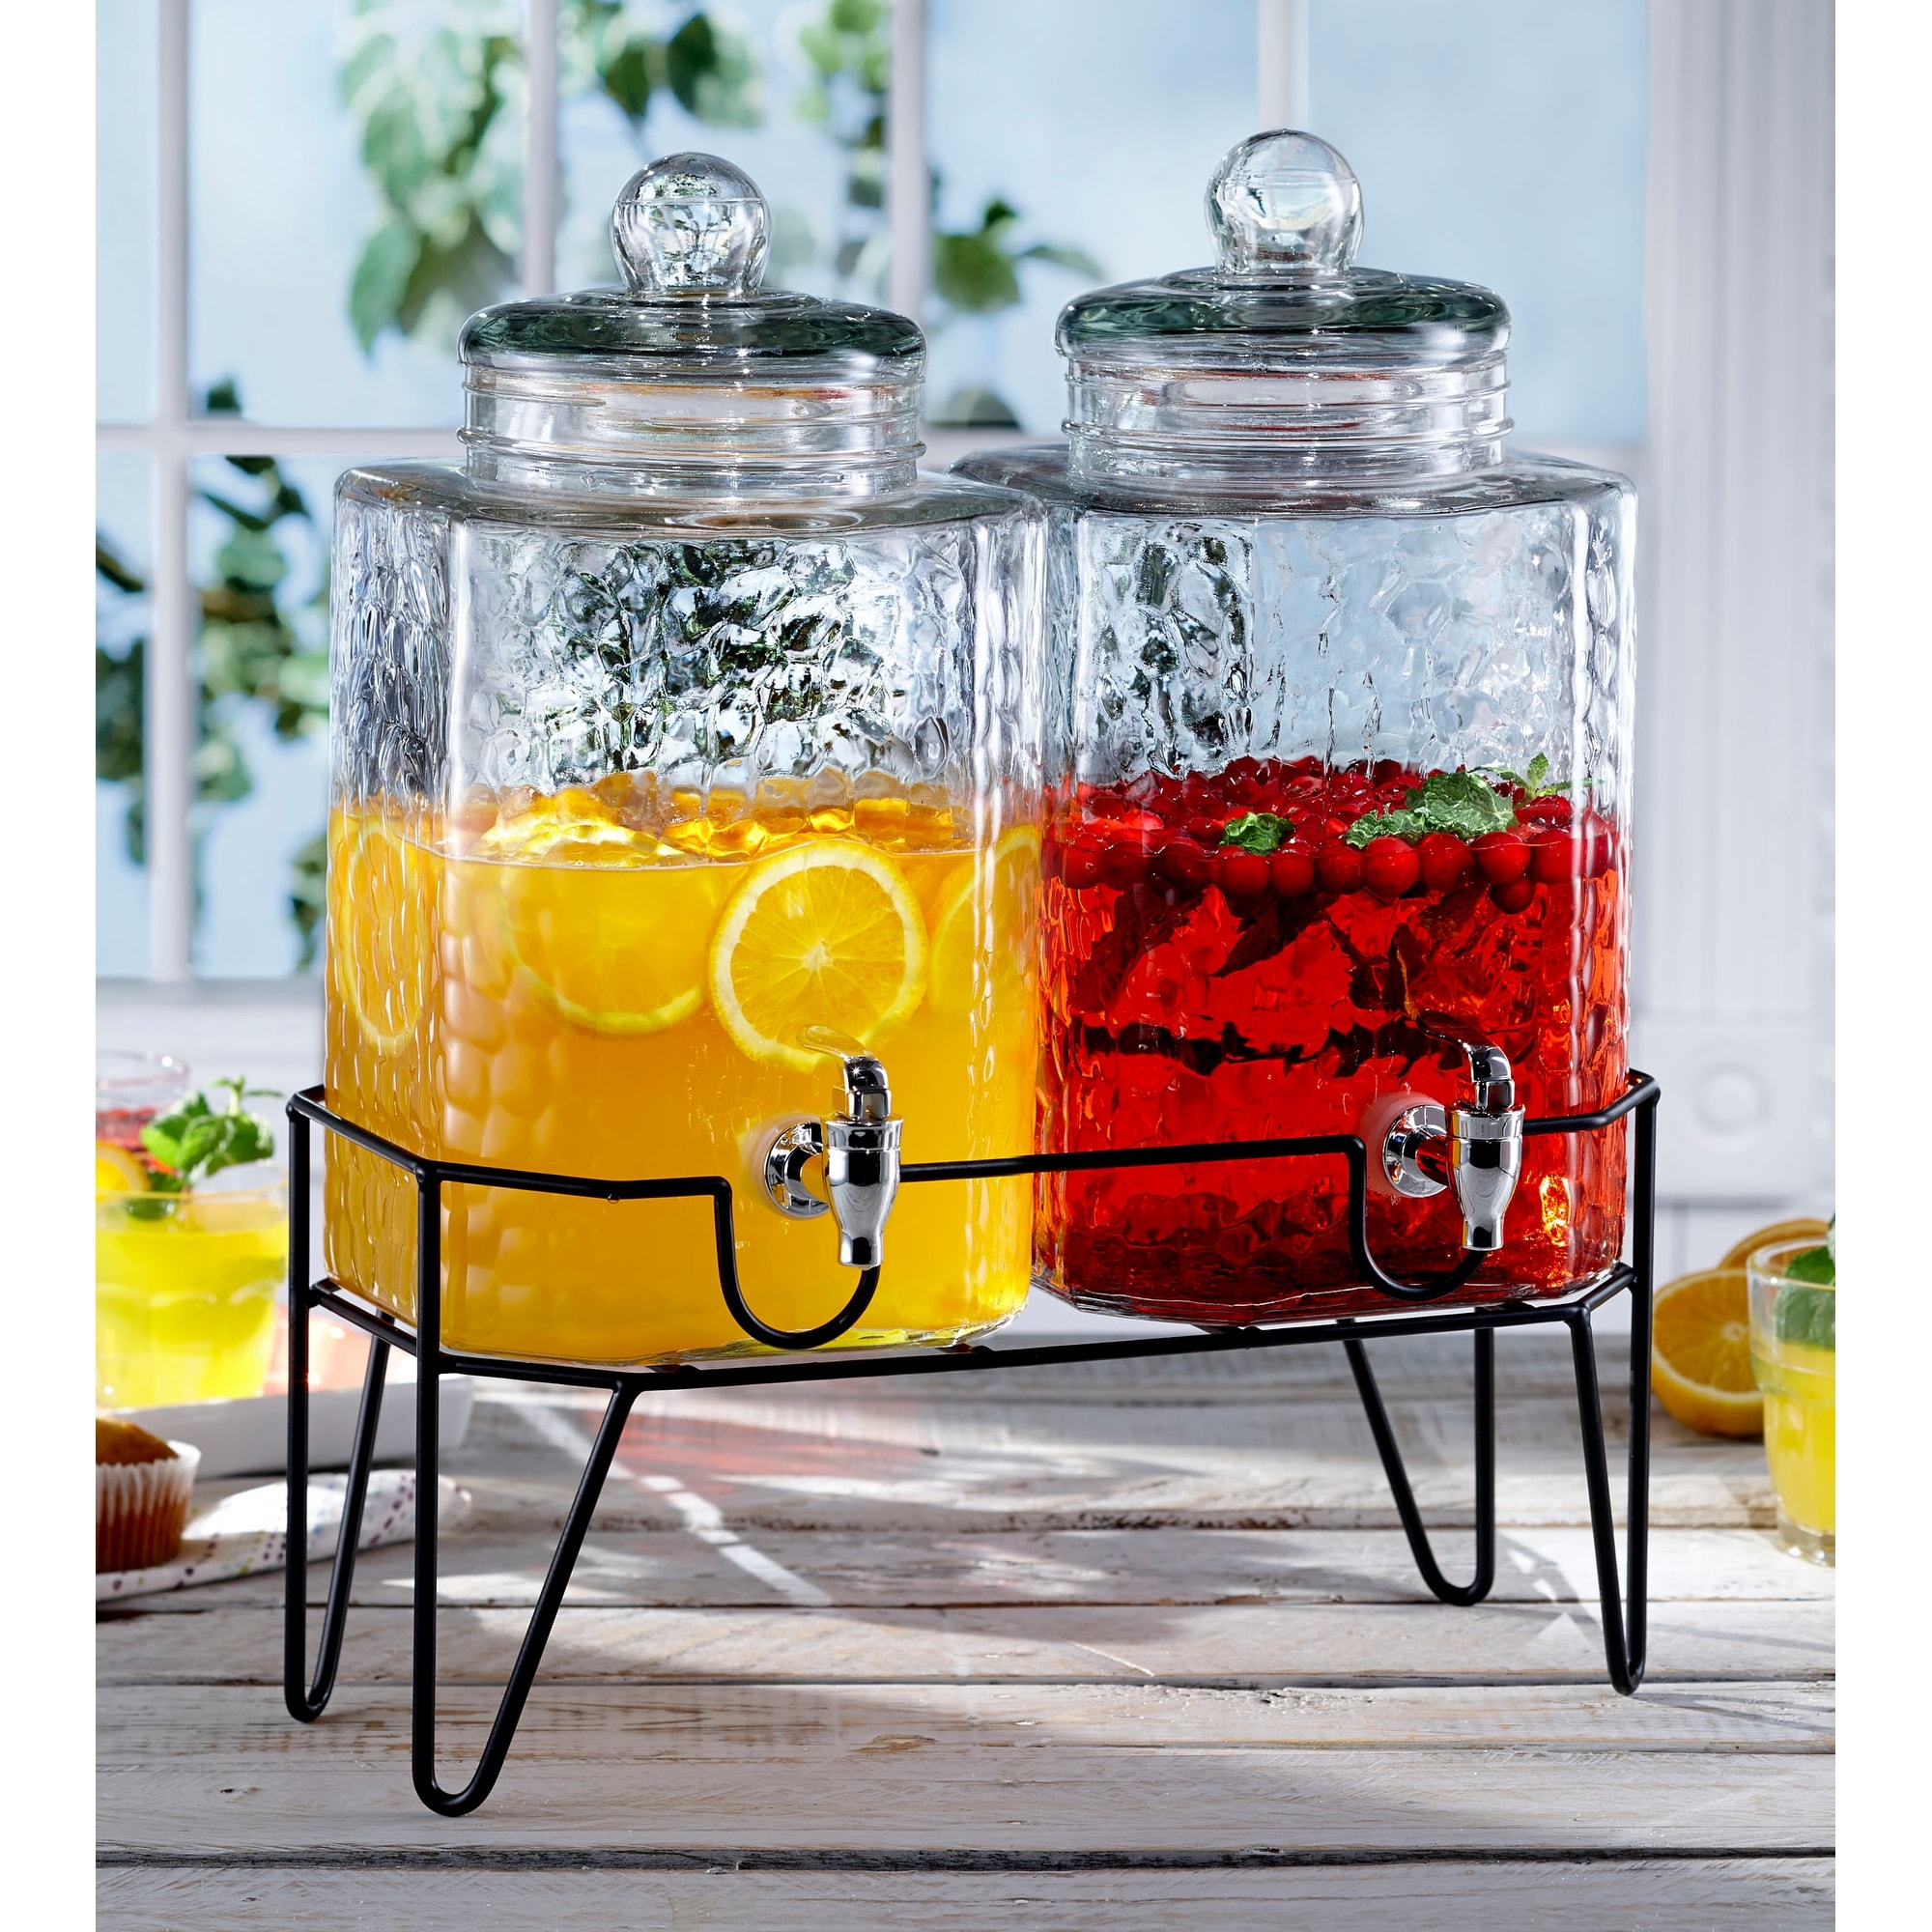 Wayfair, Plastic & Acrylic Beverage Dispensers & Drinks, Up to 65% Off  Until 11/20